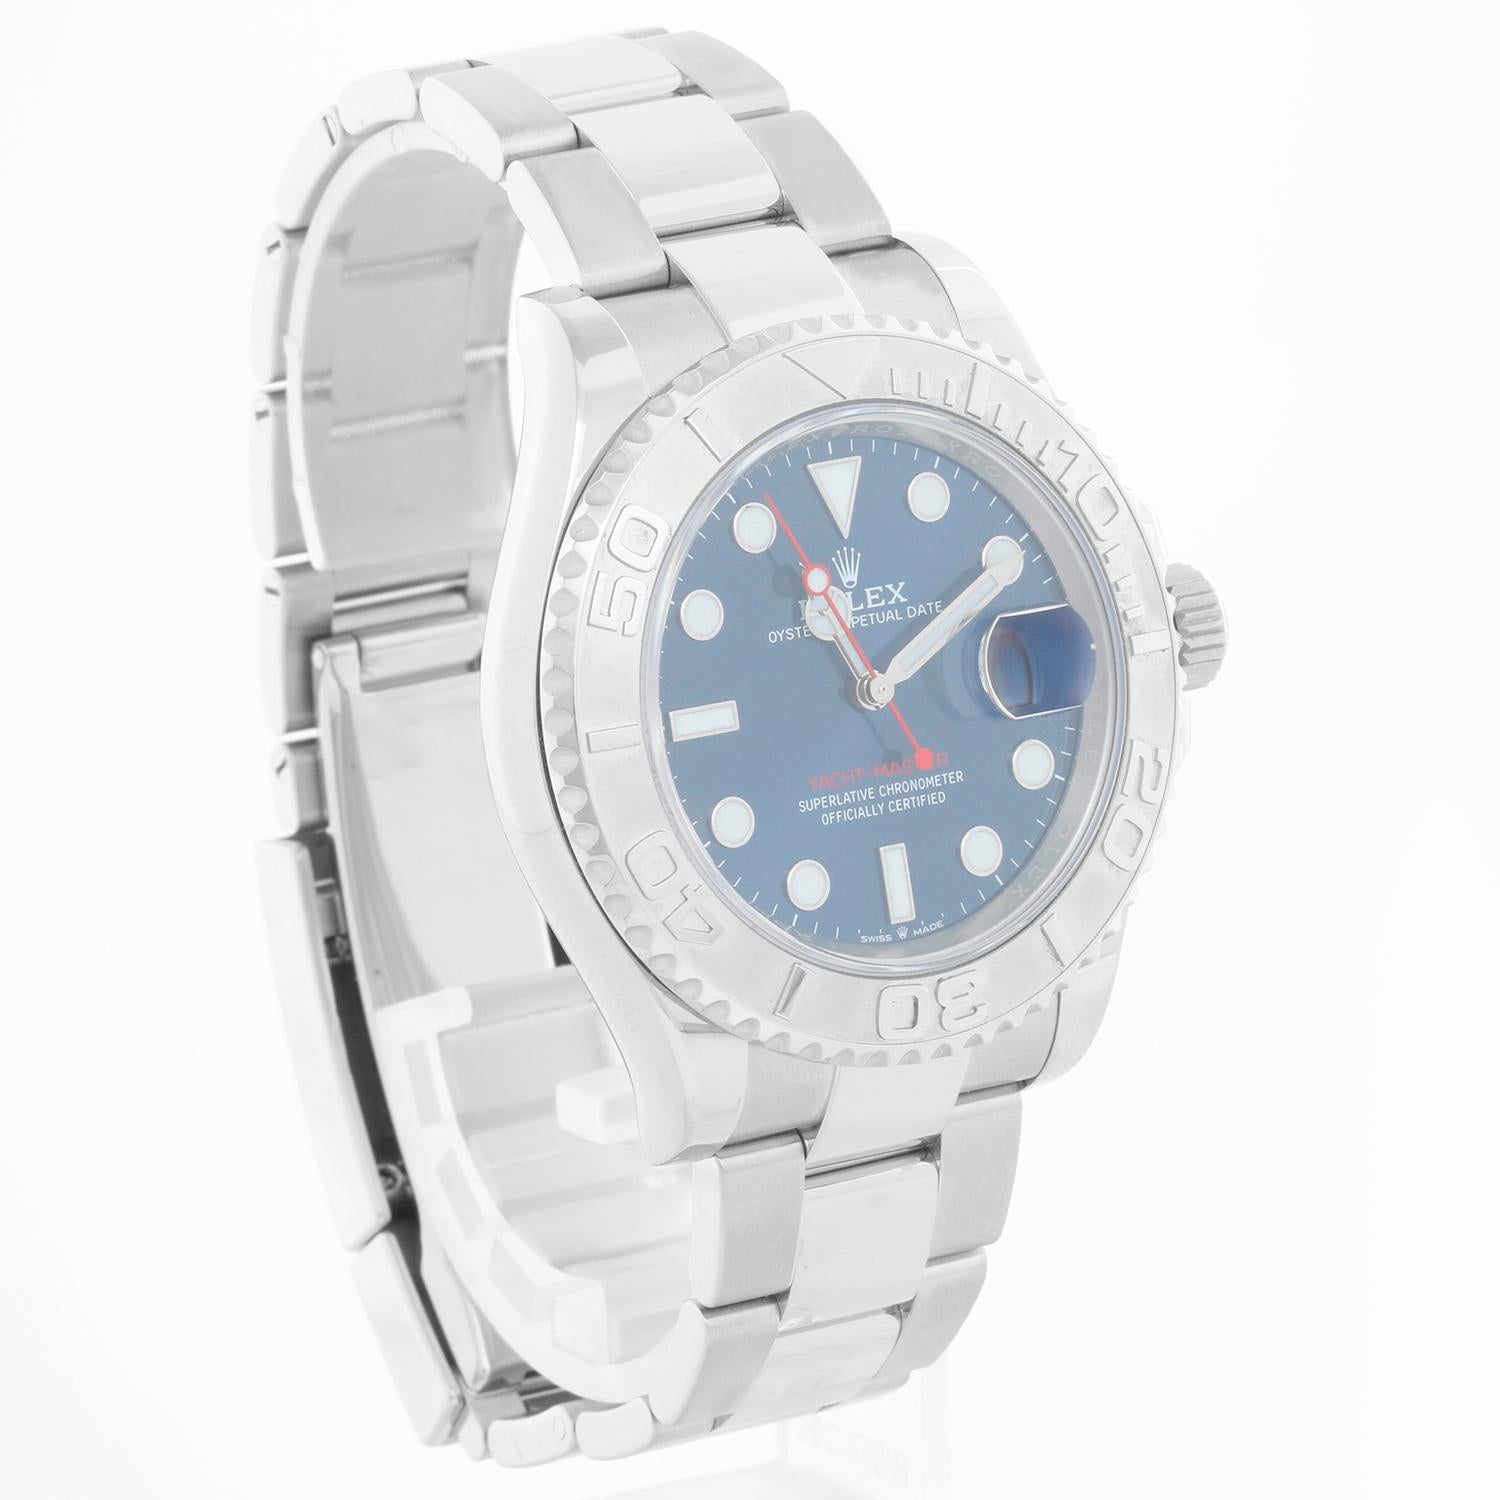 Rolex Yacht-Master Men's Stainless Steel Watch 126622 In Excellent Condition For Sale In Dallas, TX